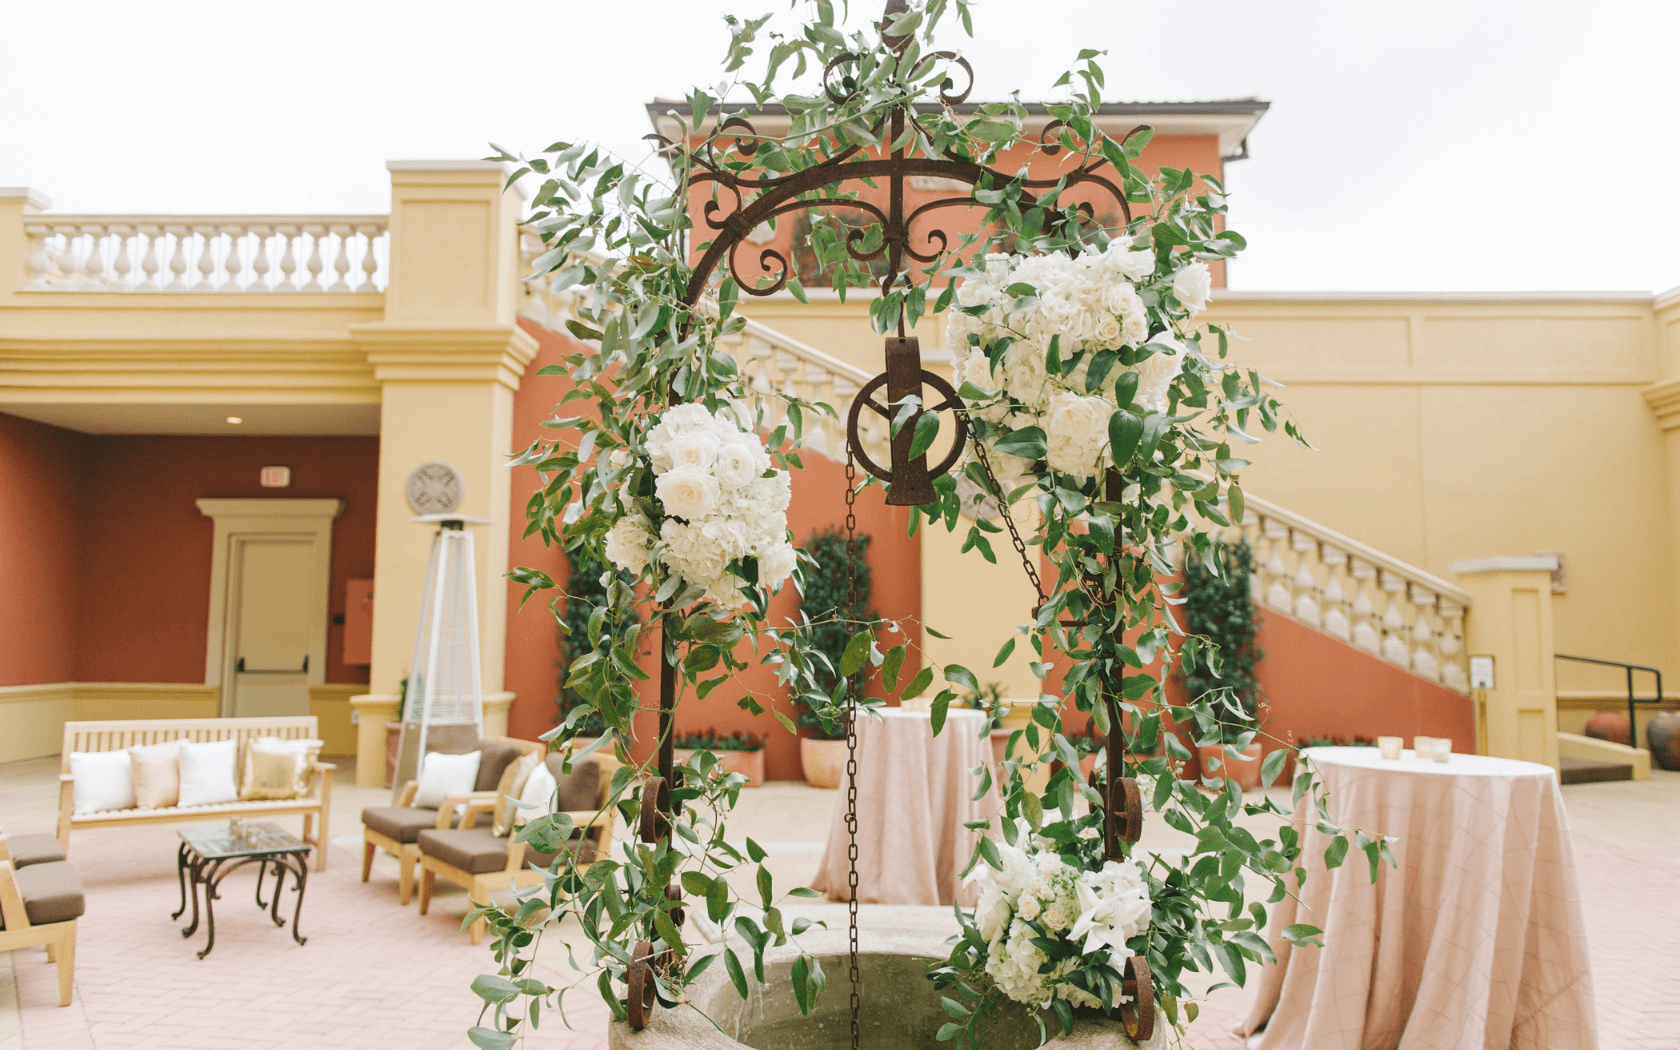 florals draped over outdoor well in courtyard for wedding reception